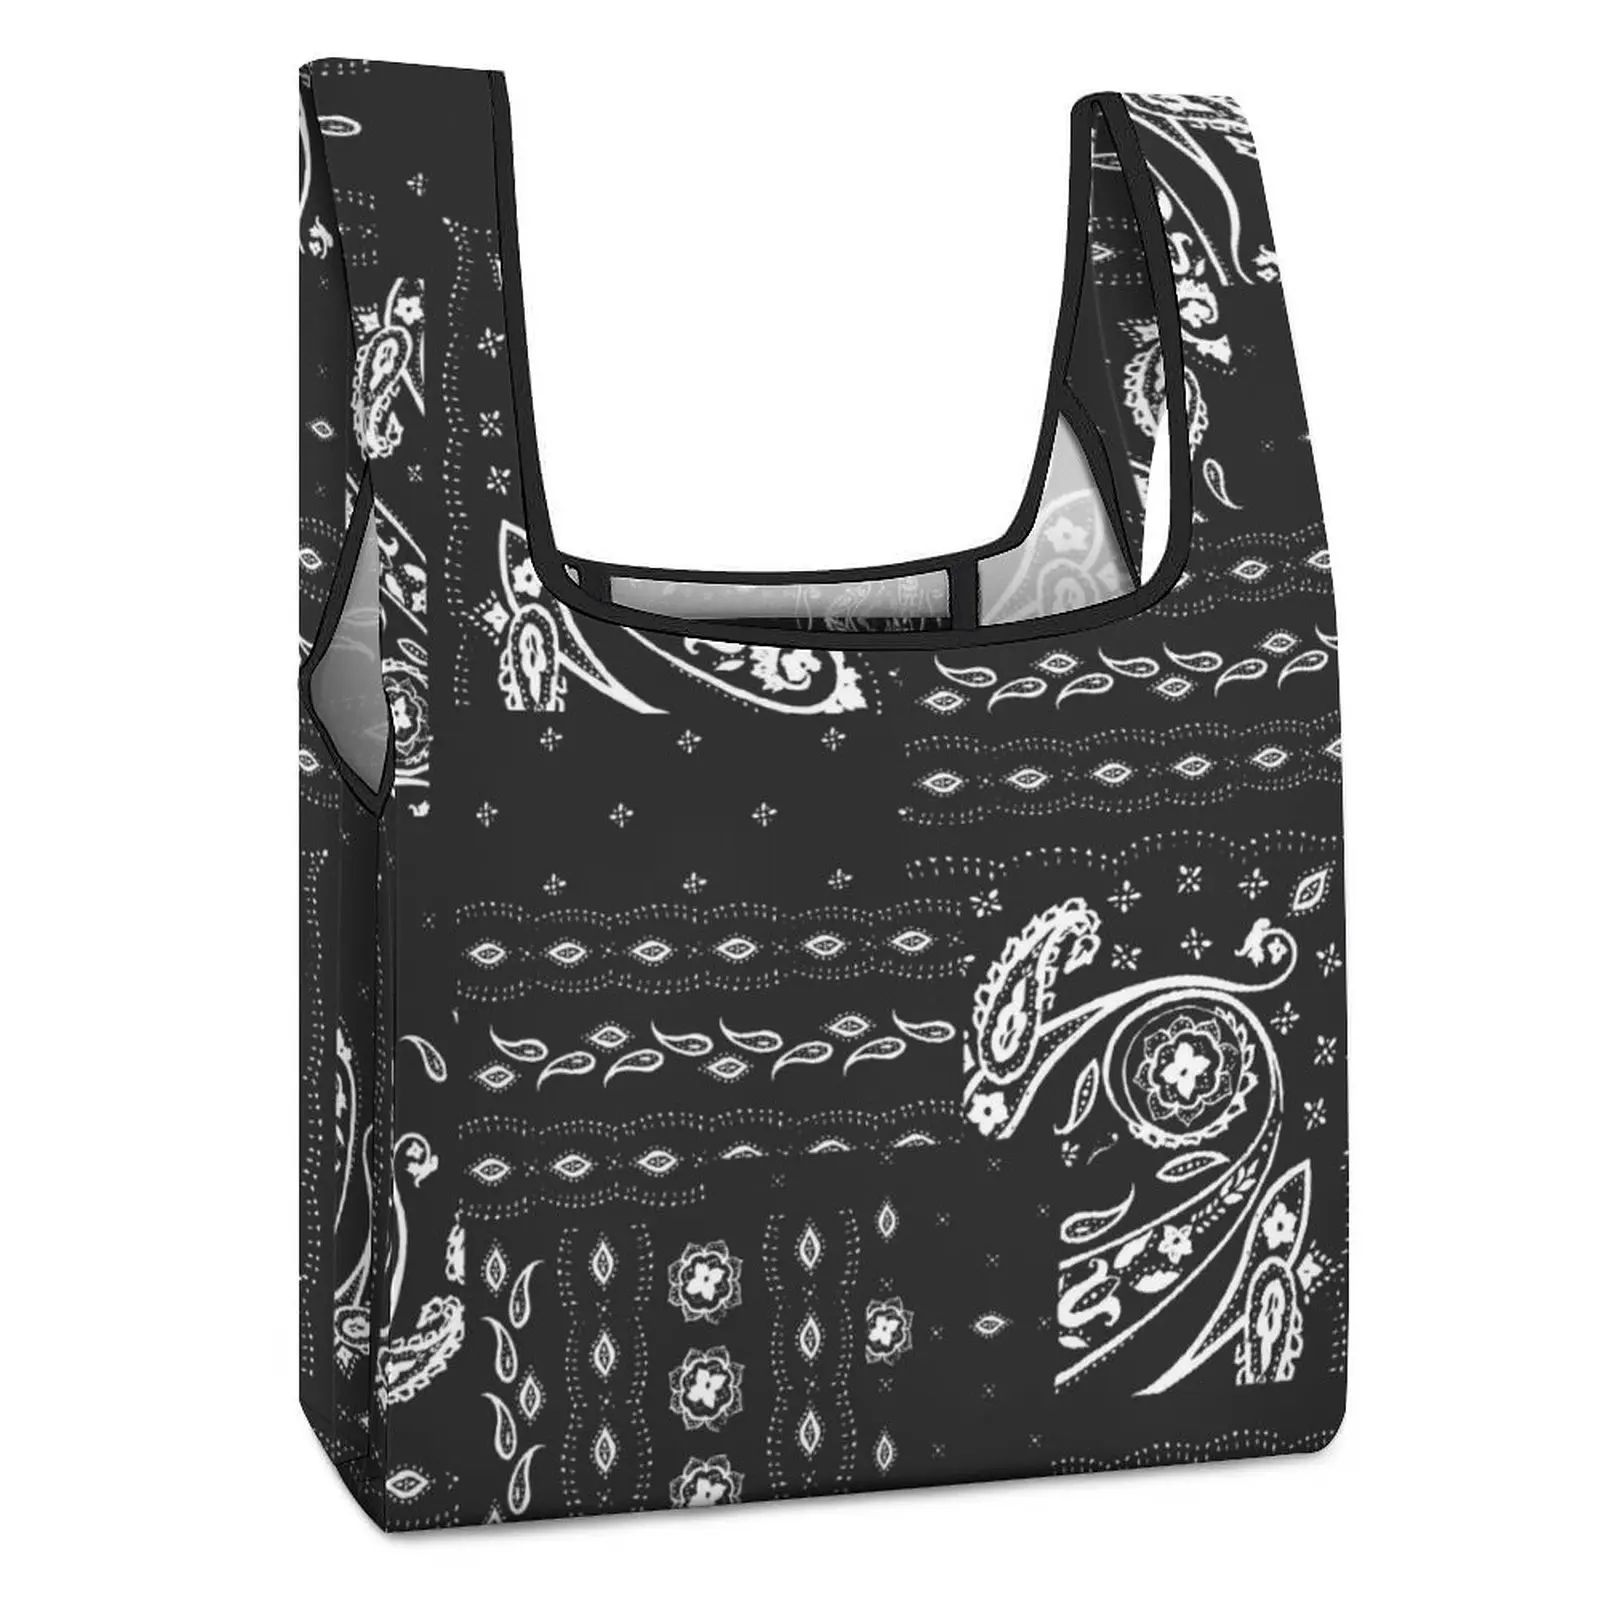 Customized Printed Shopping Bag Double Strap Handbag Black Unique Decor Tote Casual Woman Grocery Bag Custom Pattern 2 pack insulated reusable grocery bag food delivery bag with dual zipper ideal for instacart grocery transport black color